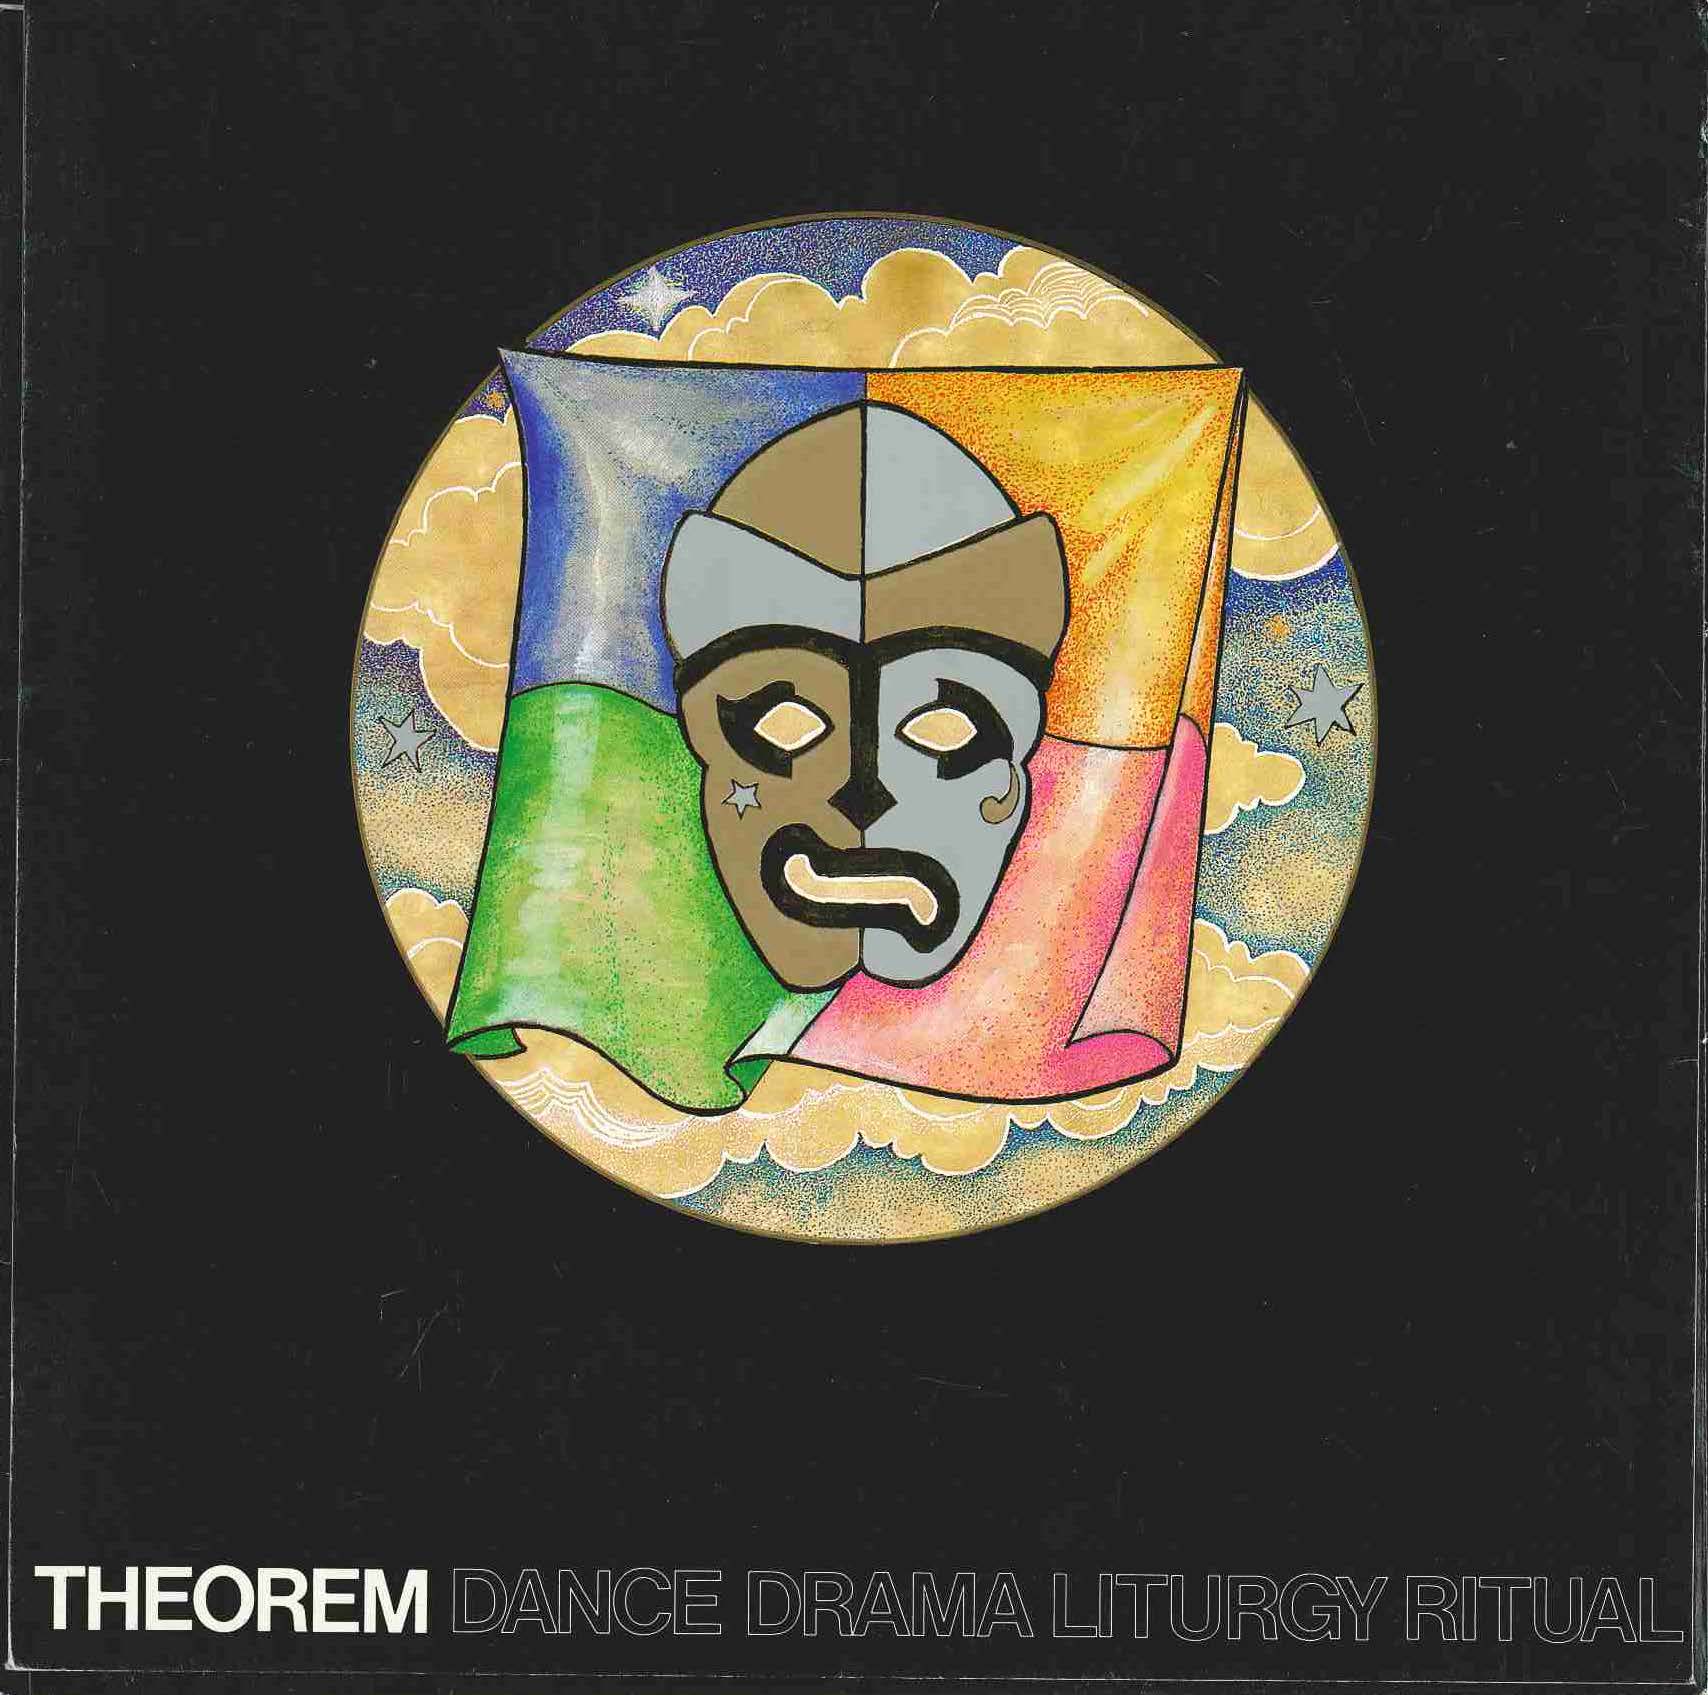 a drama face in front of clouds. Text: Theorem Dance Drama Liturgy Ritual